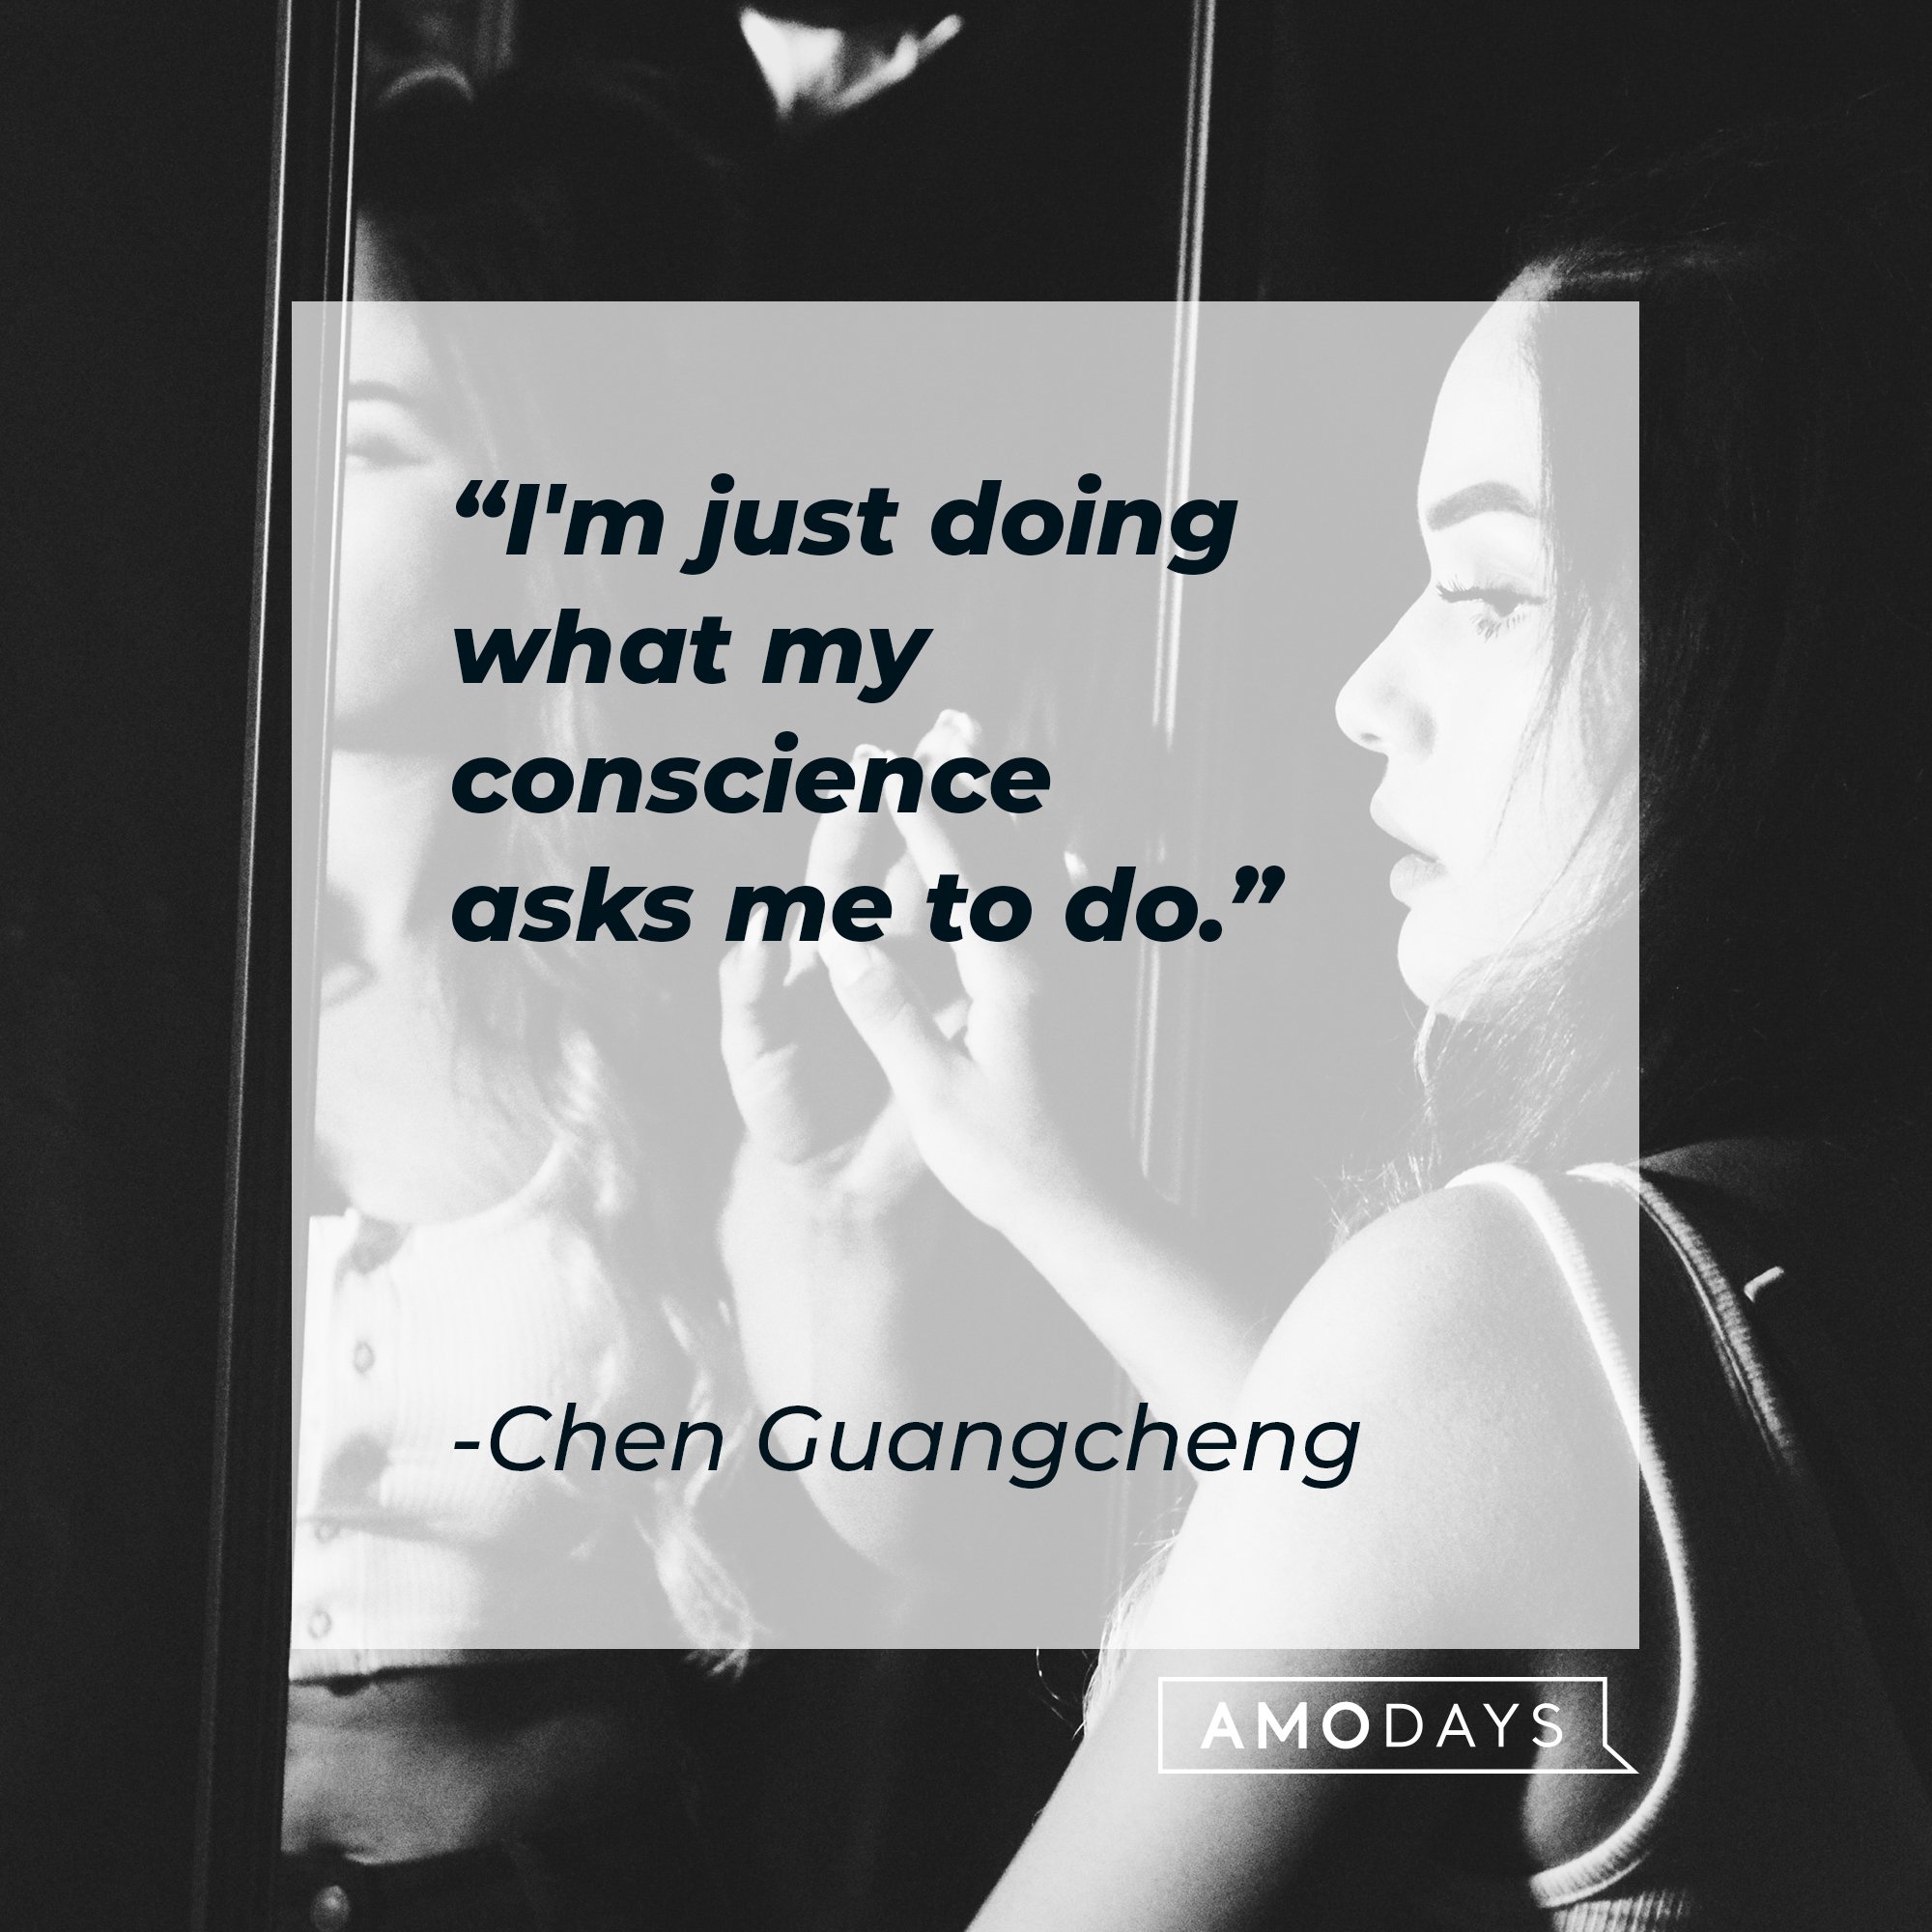 Chen Guangcheng’s quote: "I'm just doing what my conscience asks me to do." | Image: AmoDays